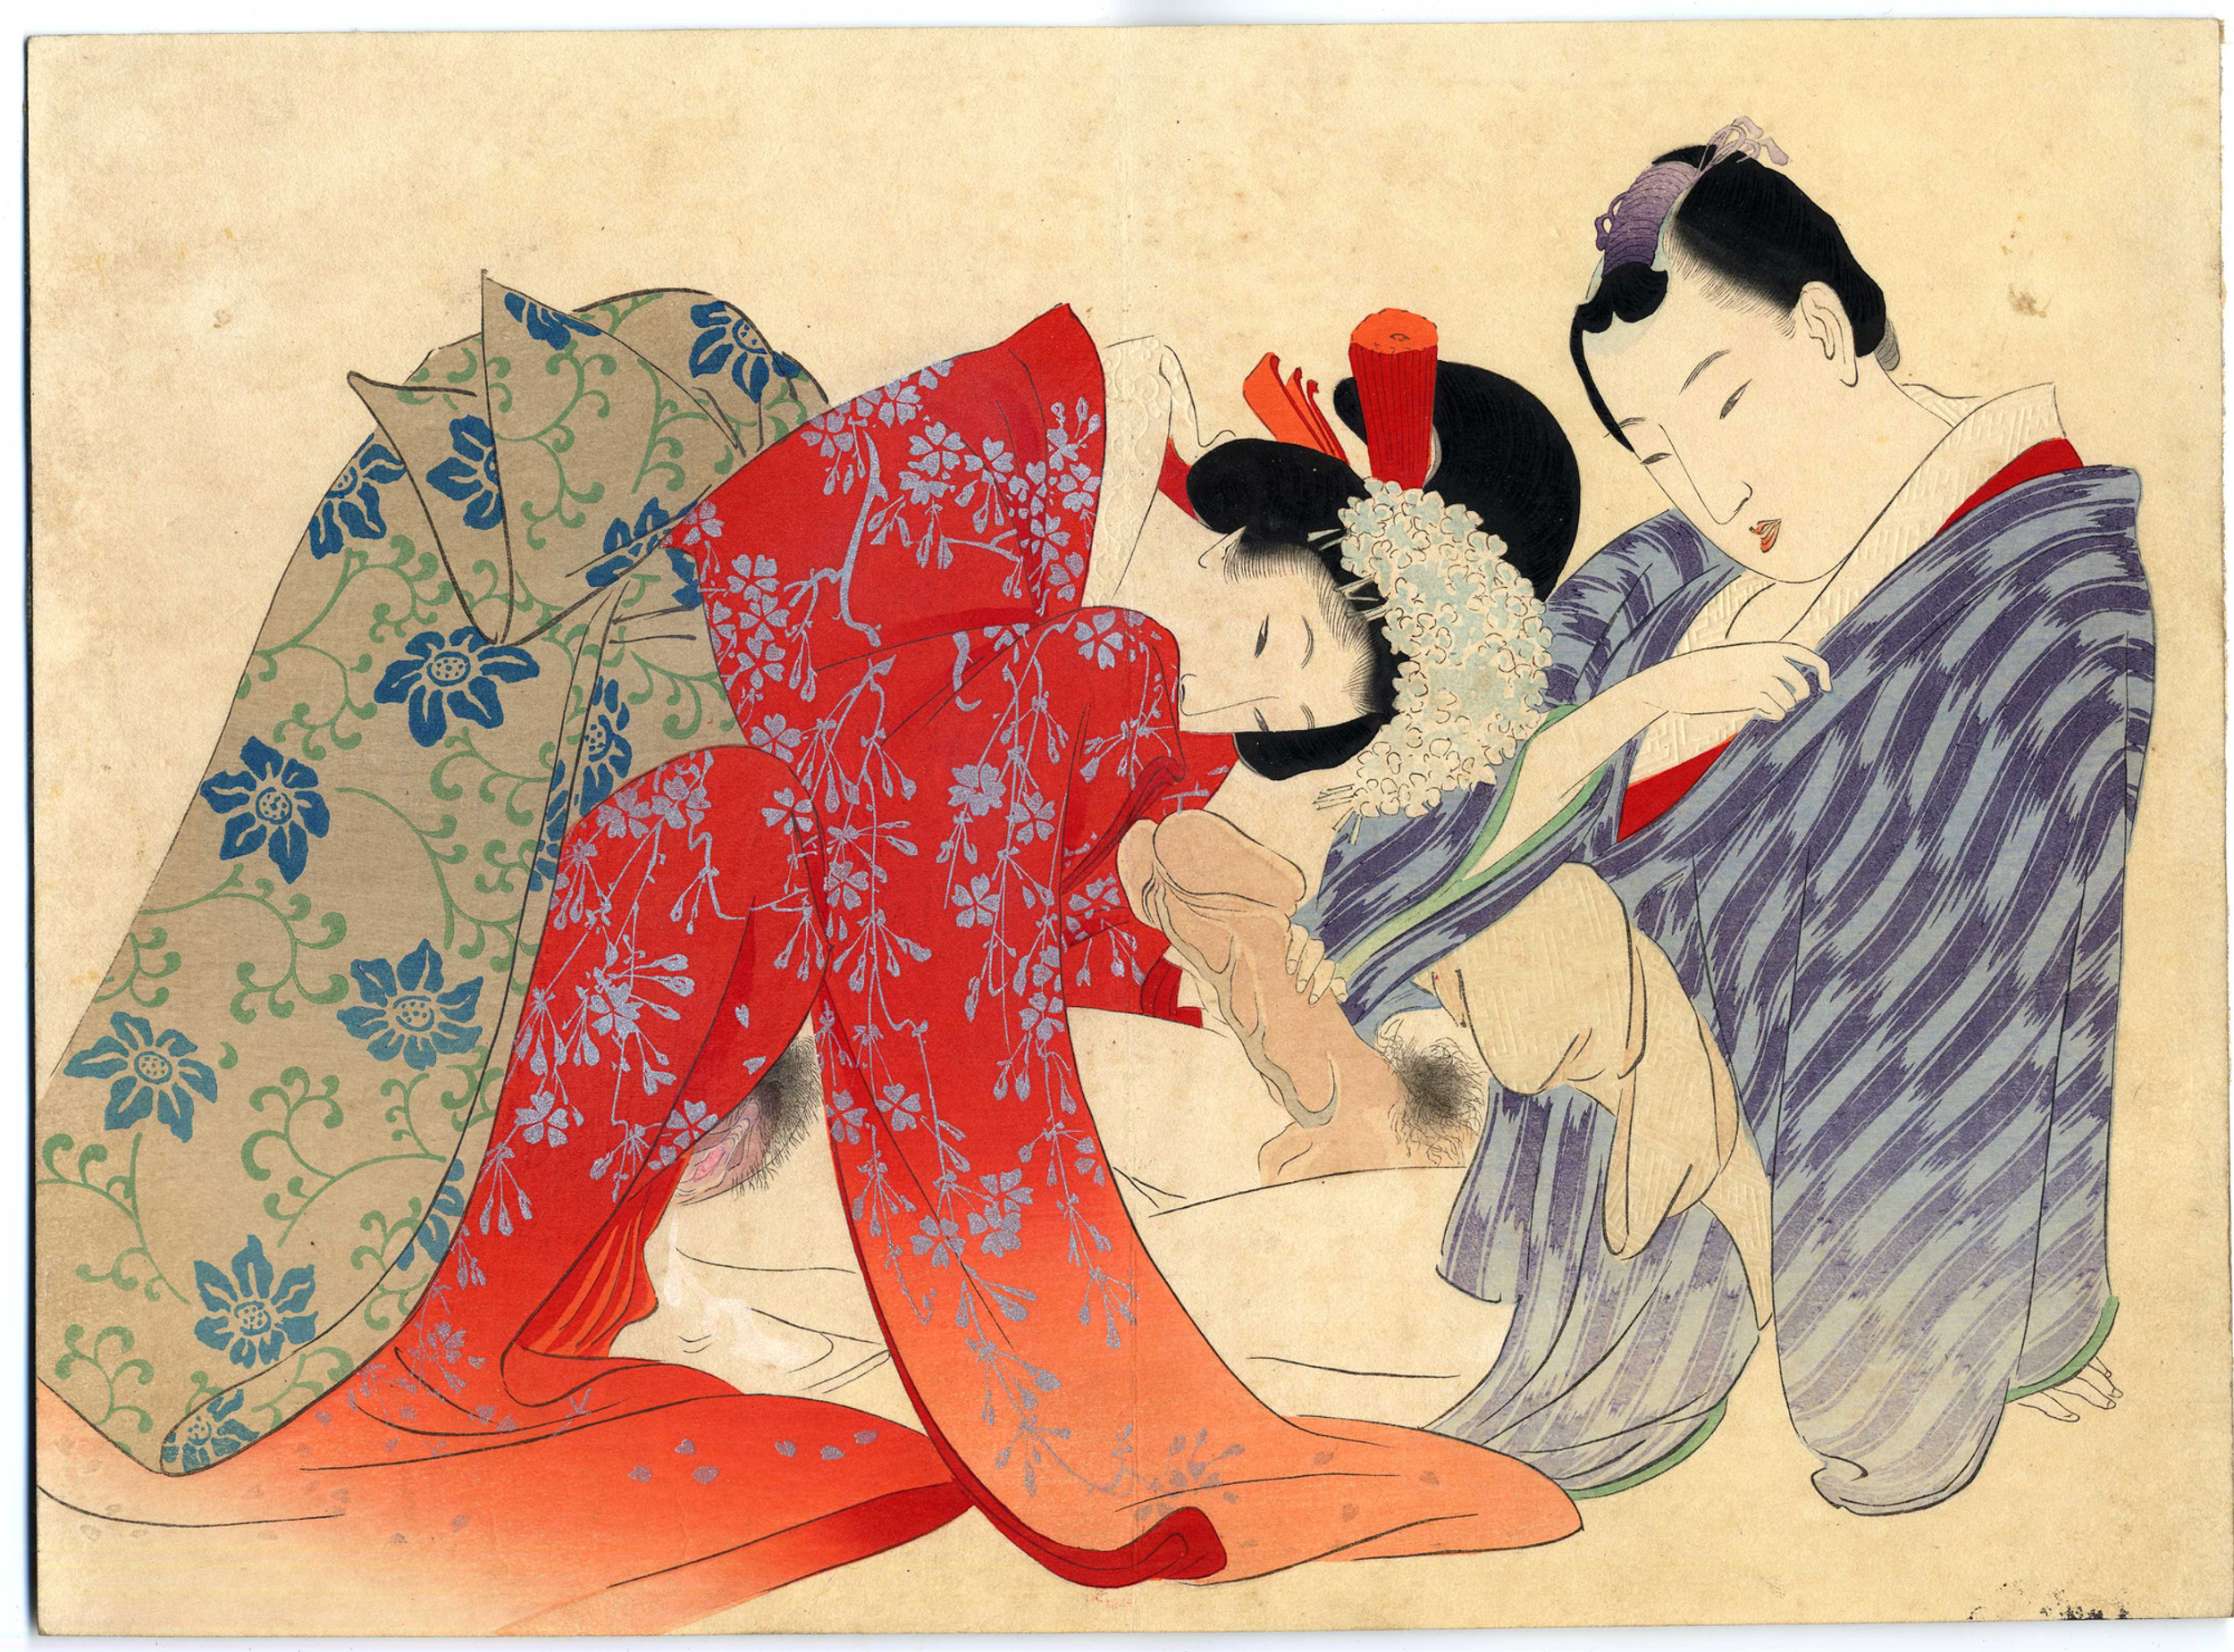 1845 Japanese Shunga Erotic Art Party by PULSE Gallery